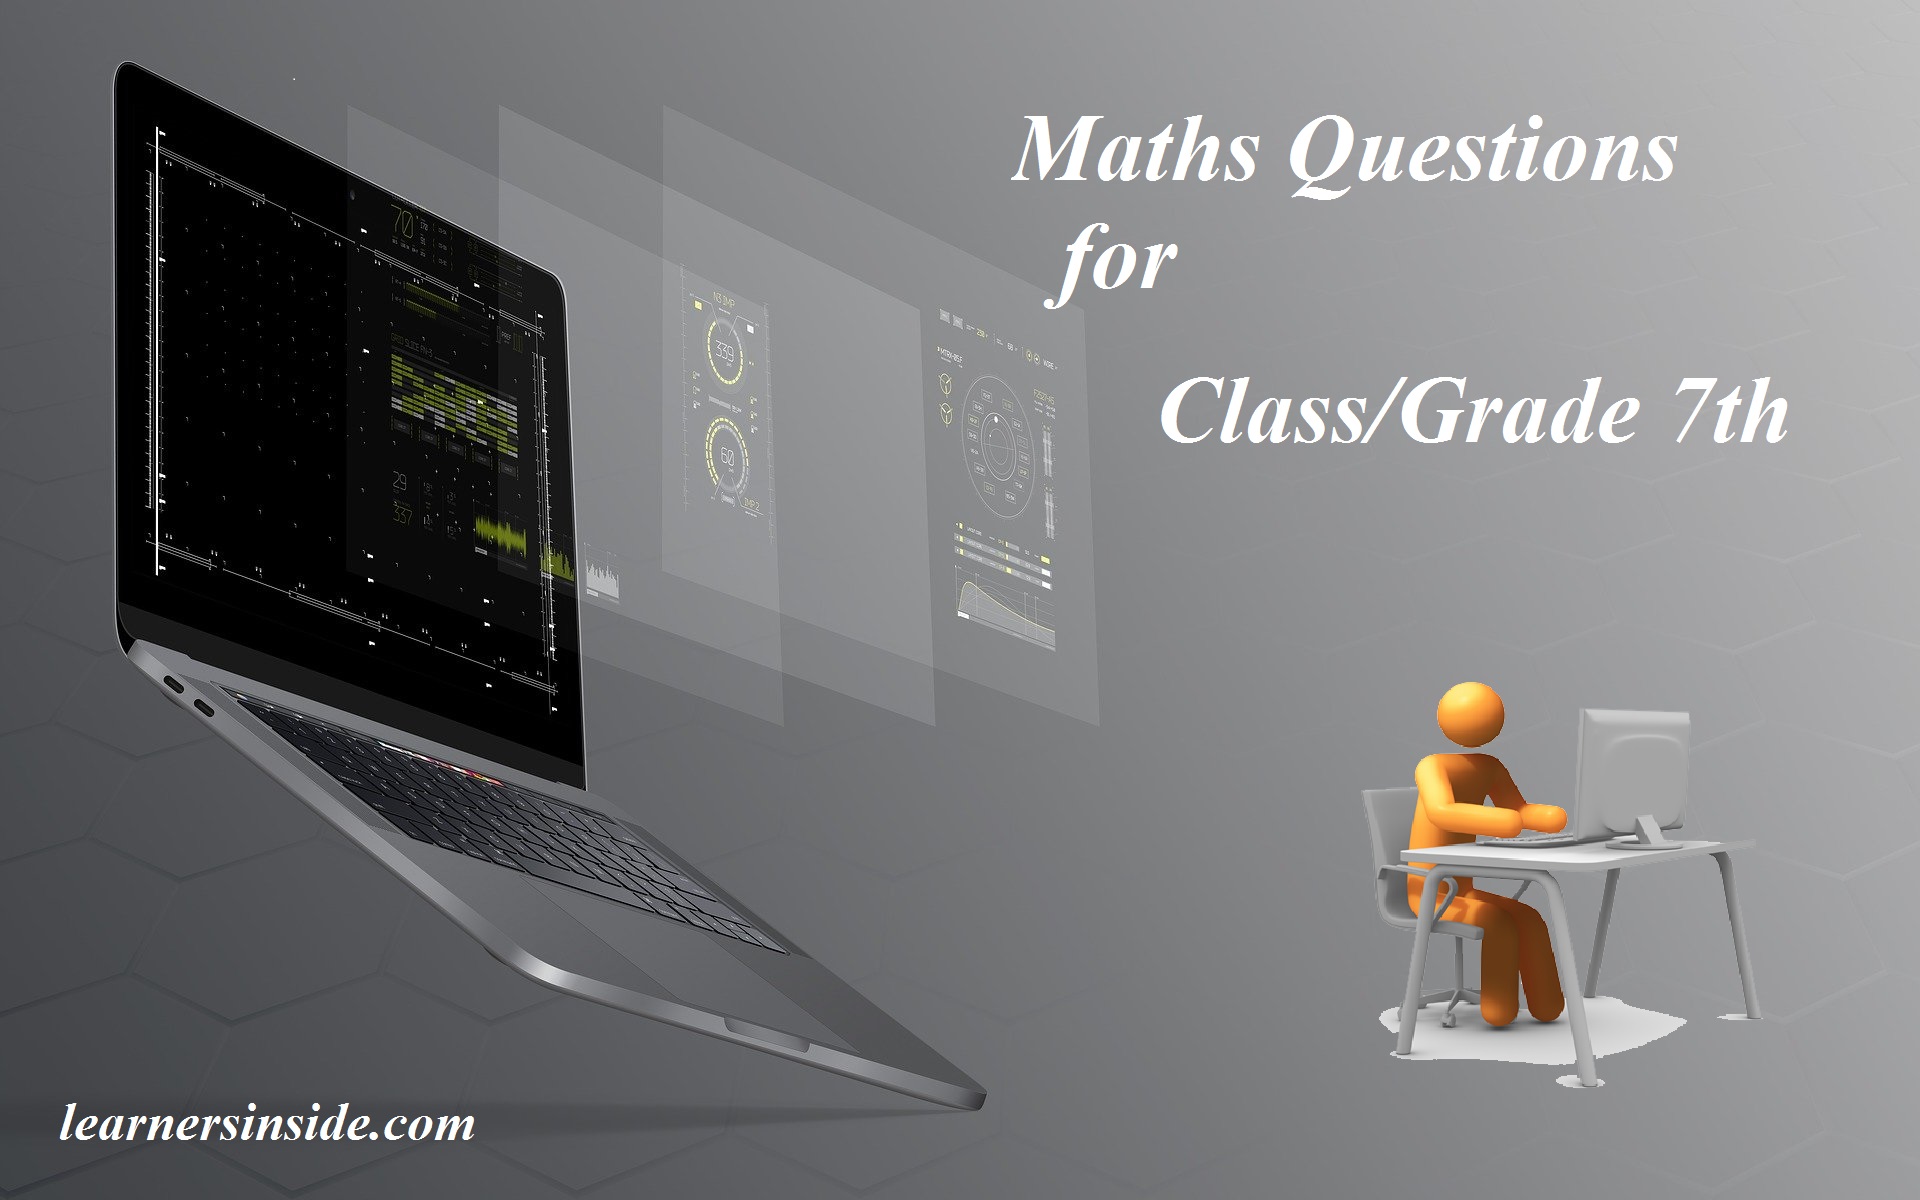 Maths Questions for Class/Grade 7th | Practice | CBSE, ICSE Board